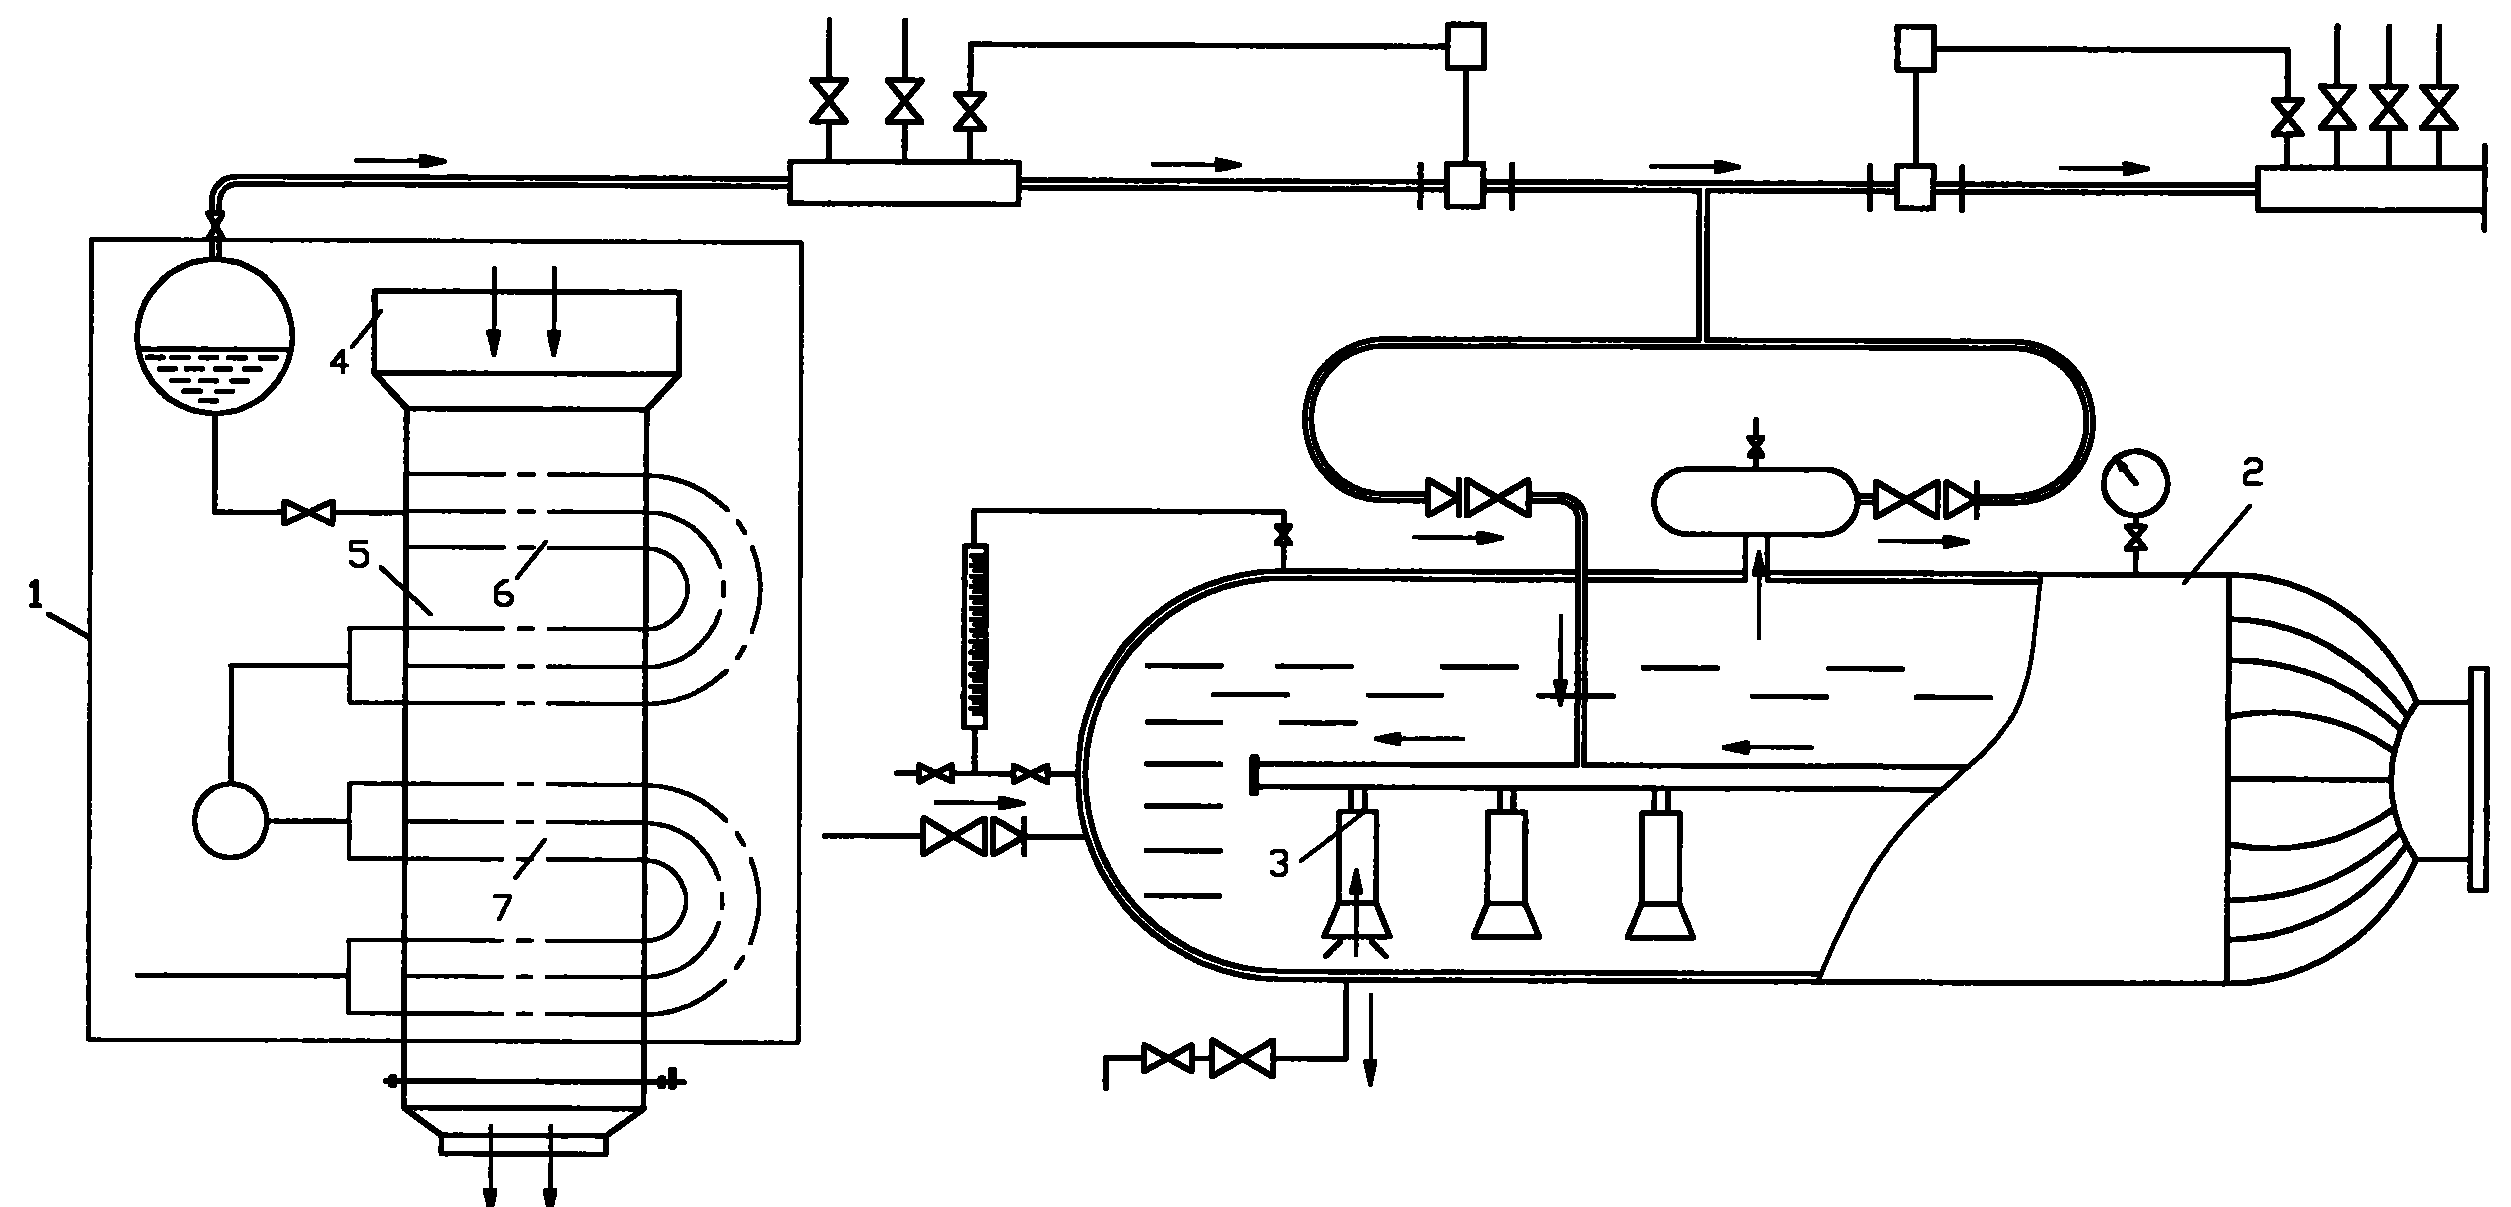 Heat energy recovery system of slag of magnesium reducing furnace